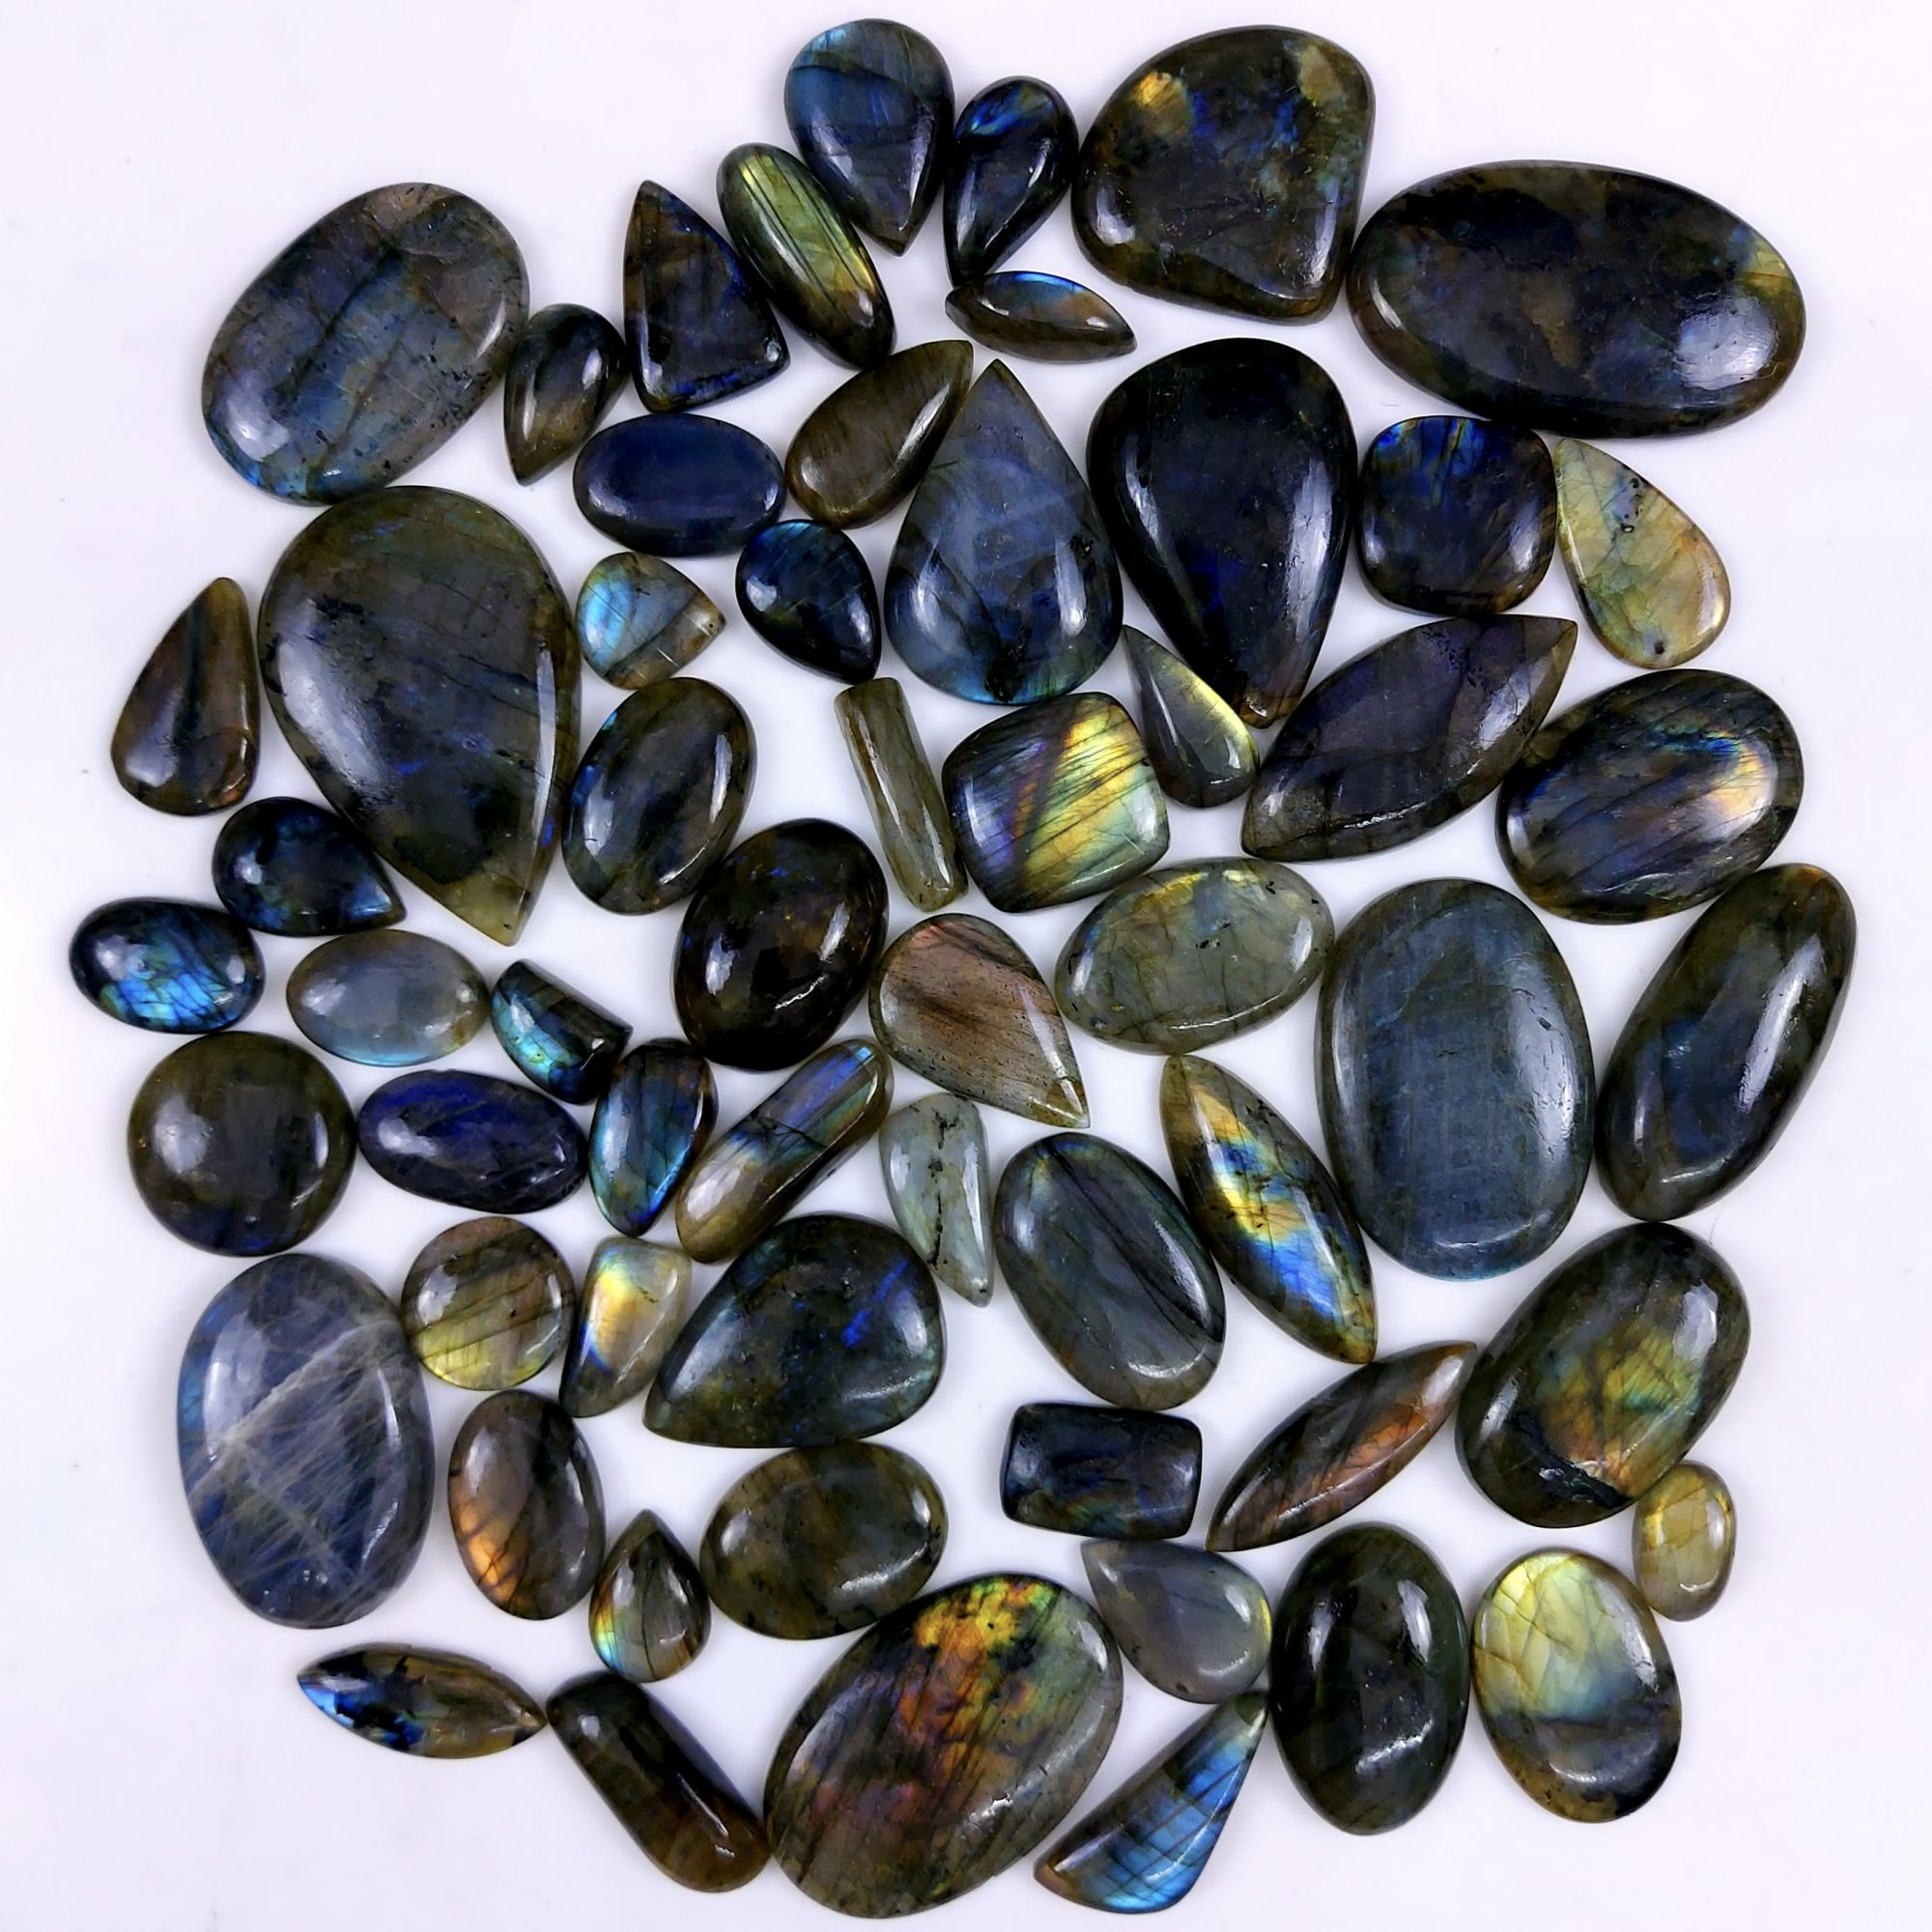 59pc 1750Cts Labradorite Cabochon Multifire Healing Crystal For Jewelry Supplies, Labradorite Necklace Handmade Wire Wrapped Gemstone Pendant 45x28 19x16mm#6365